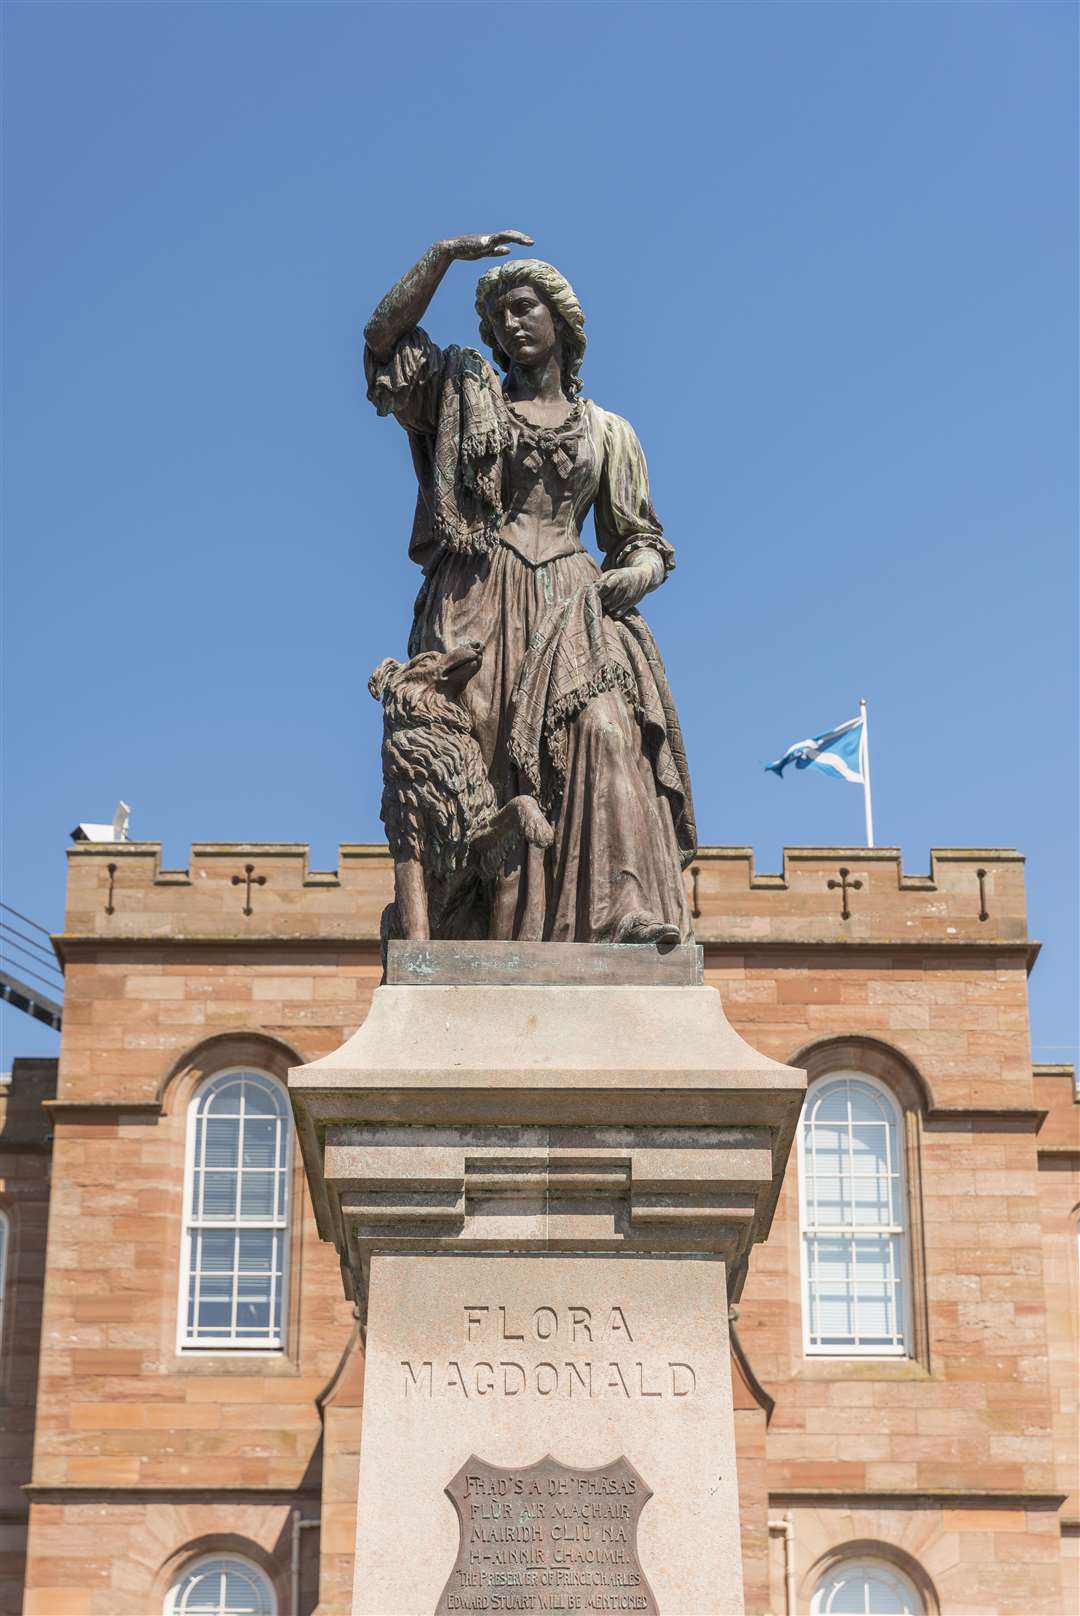 Plans to light up the statue of Flora MacDonald have been submitted.